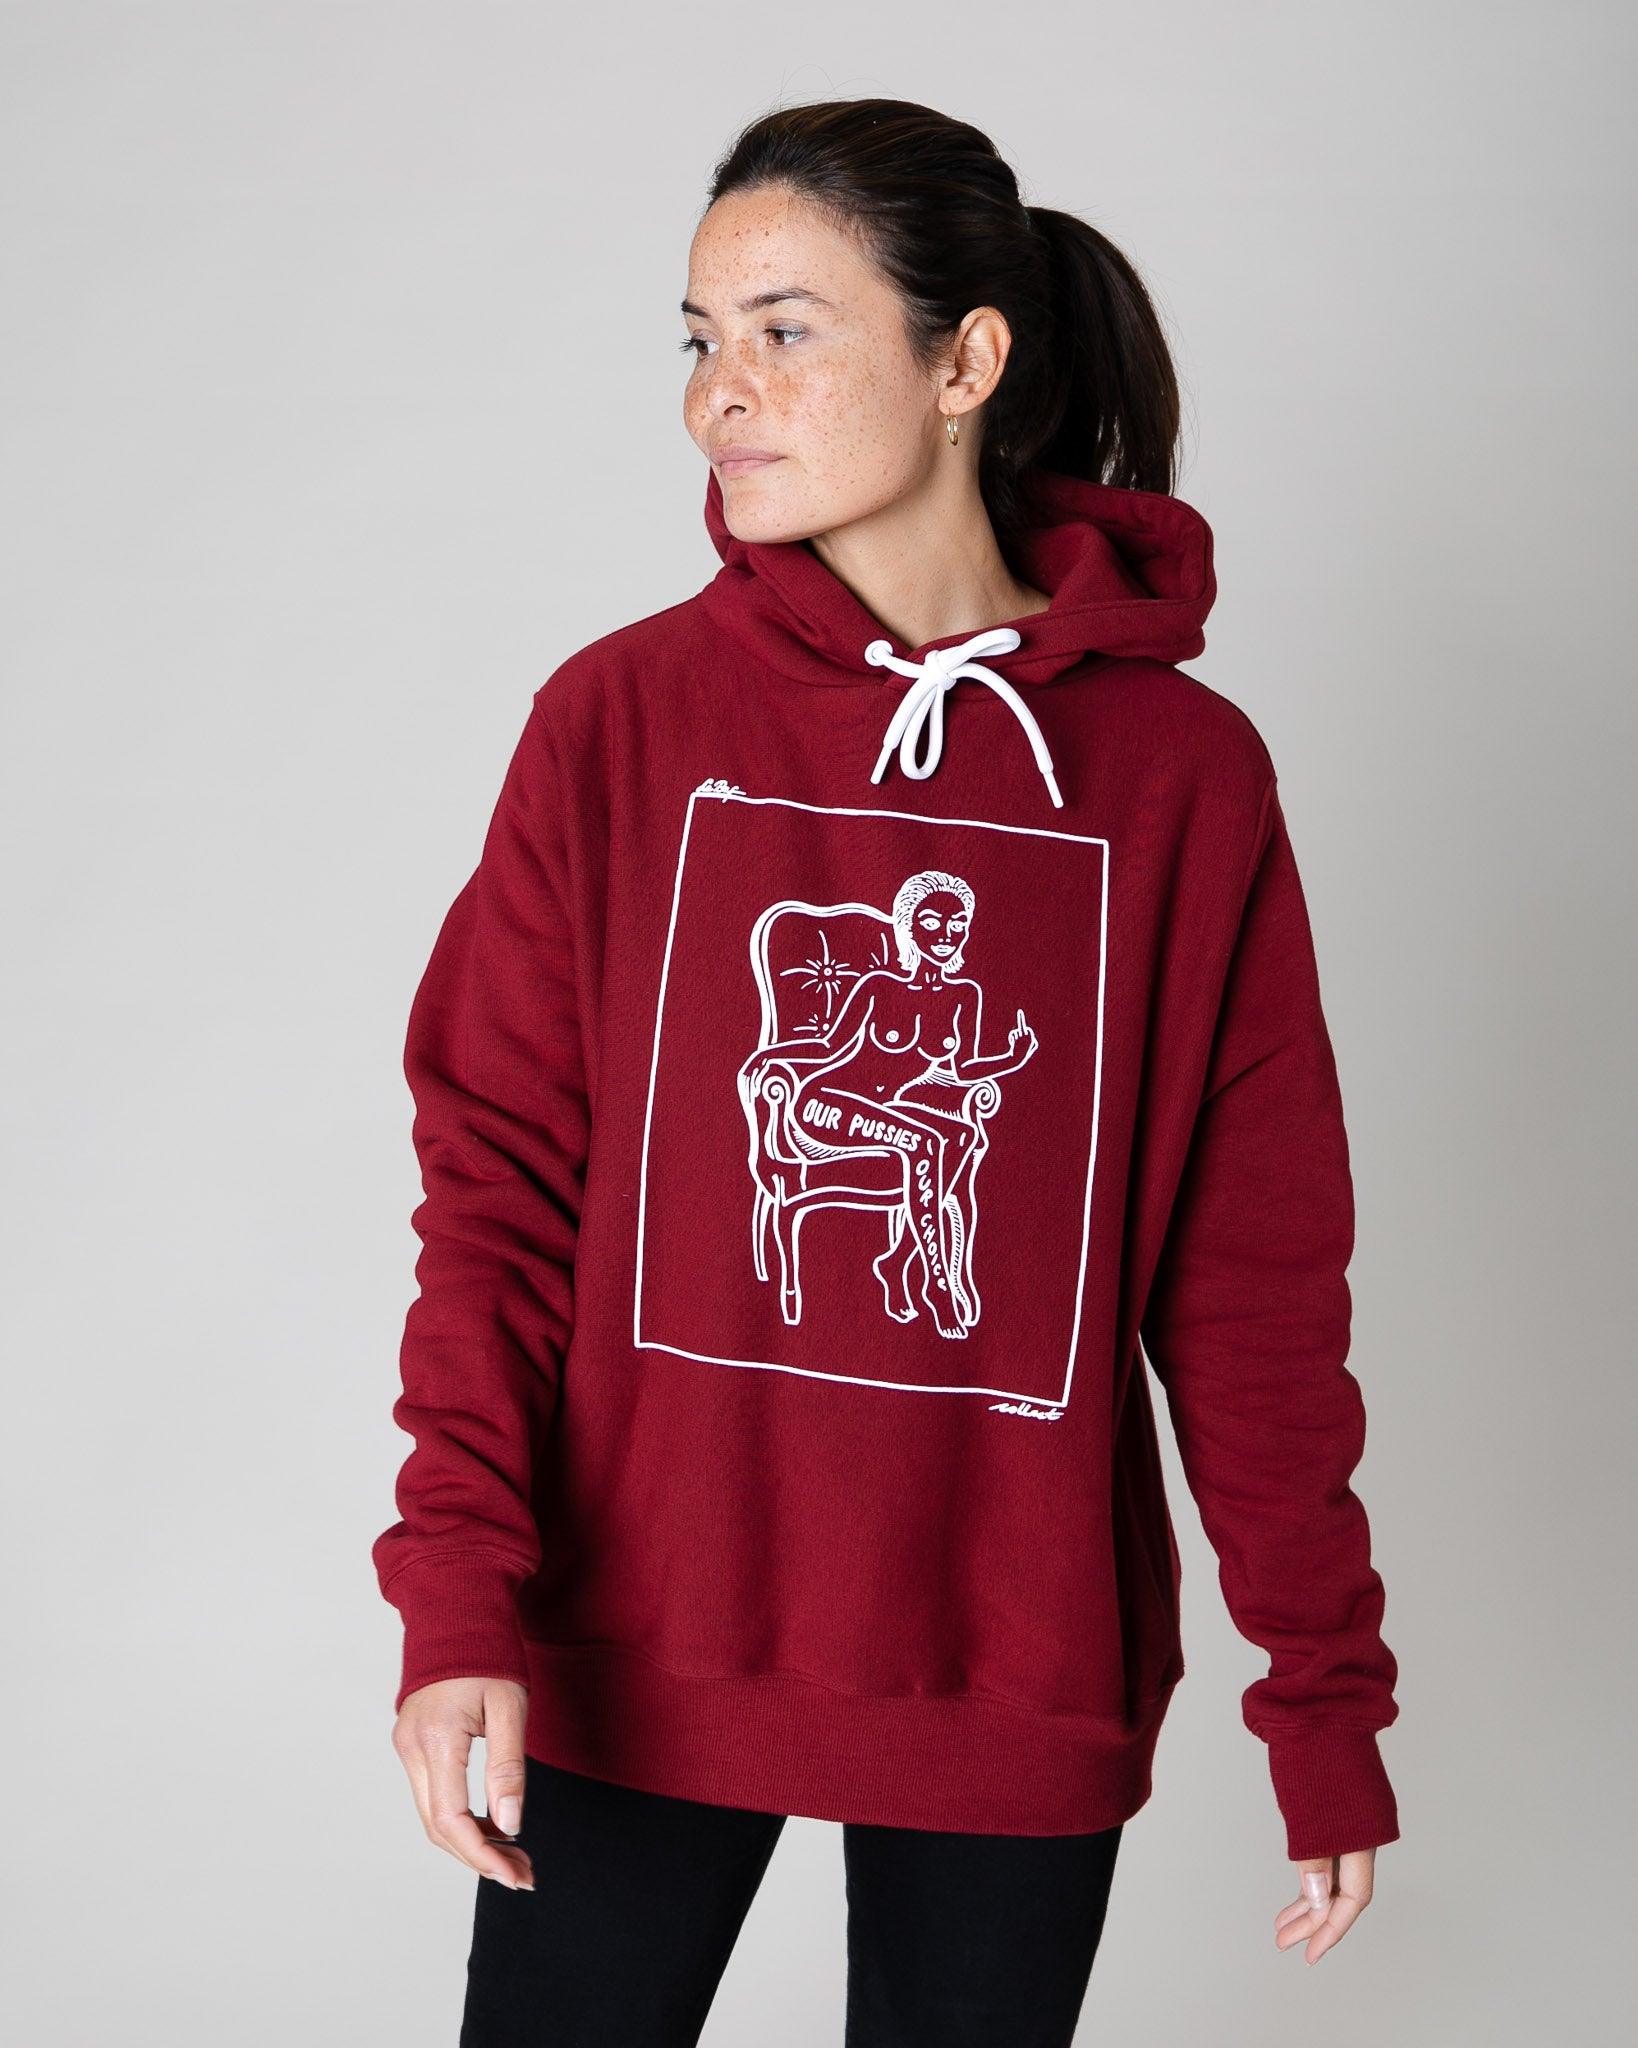 Our Pussies Our Choice Hoodie